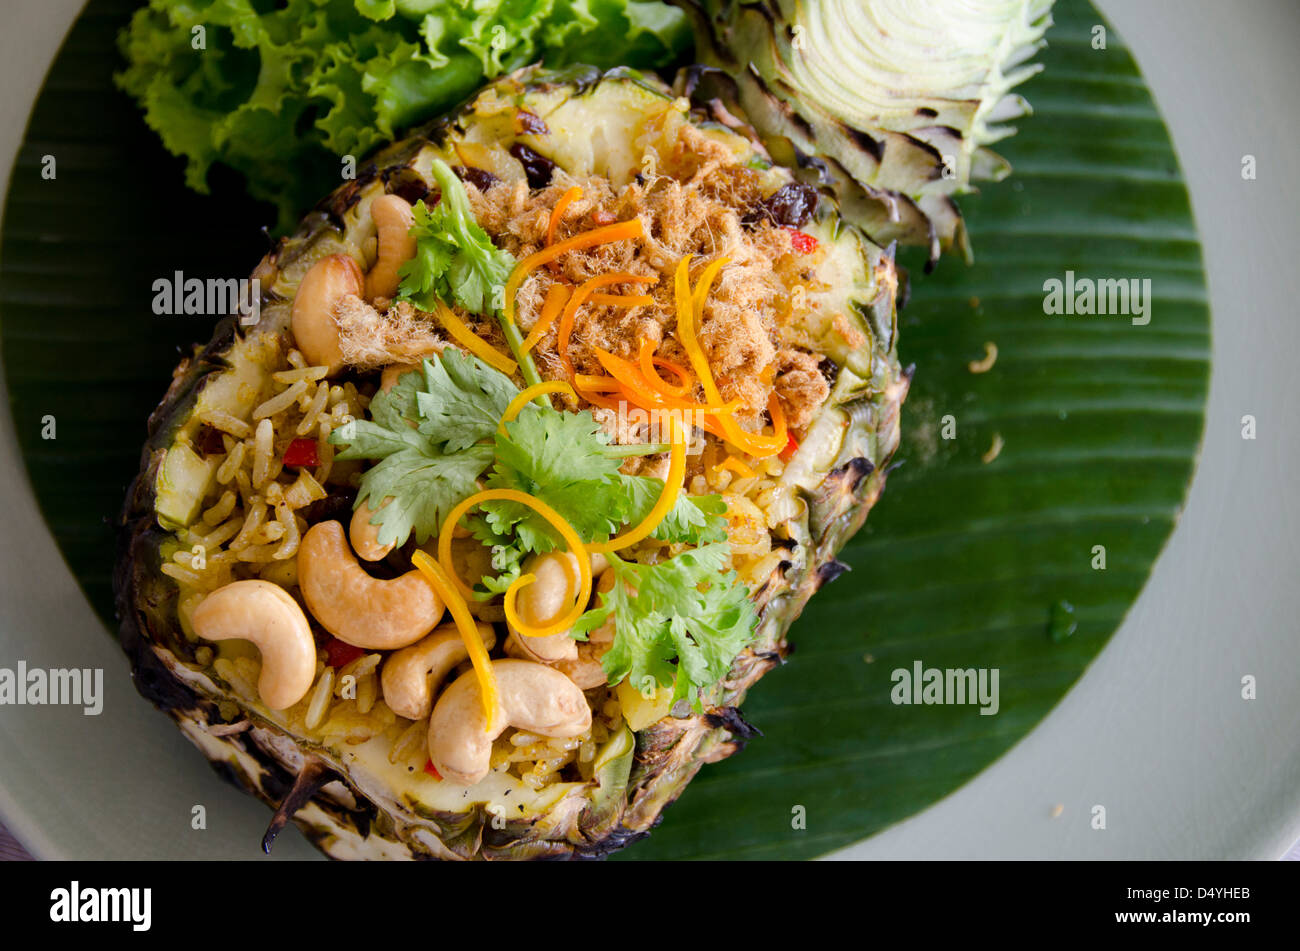 Thailand, Bangkok. Typical Thai food, curried rice with pineapple, shrimp, cashew nuts, ginger, and coconut. Stock Photo